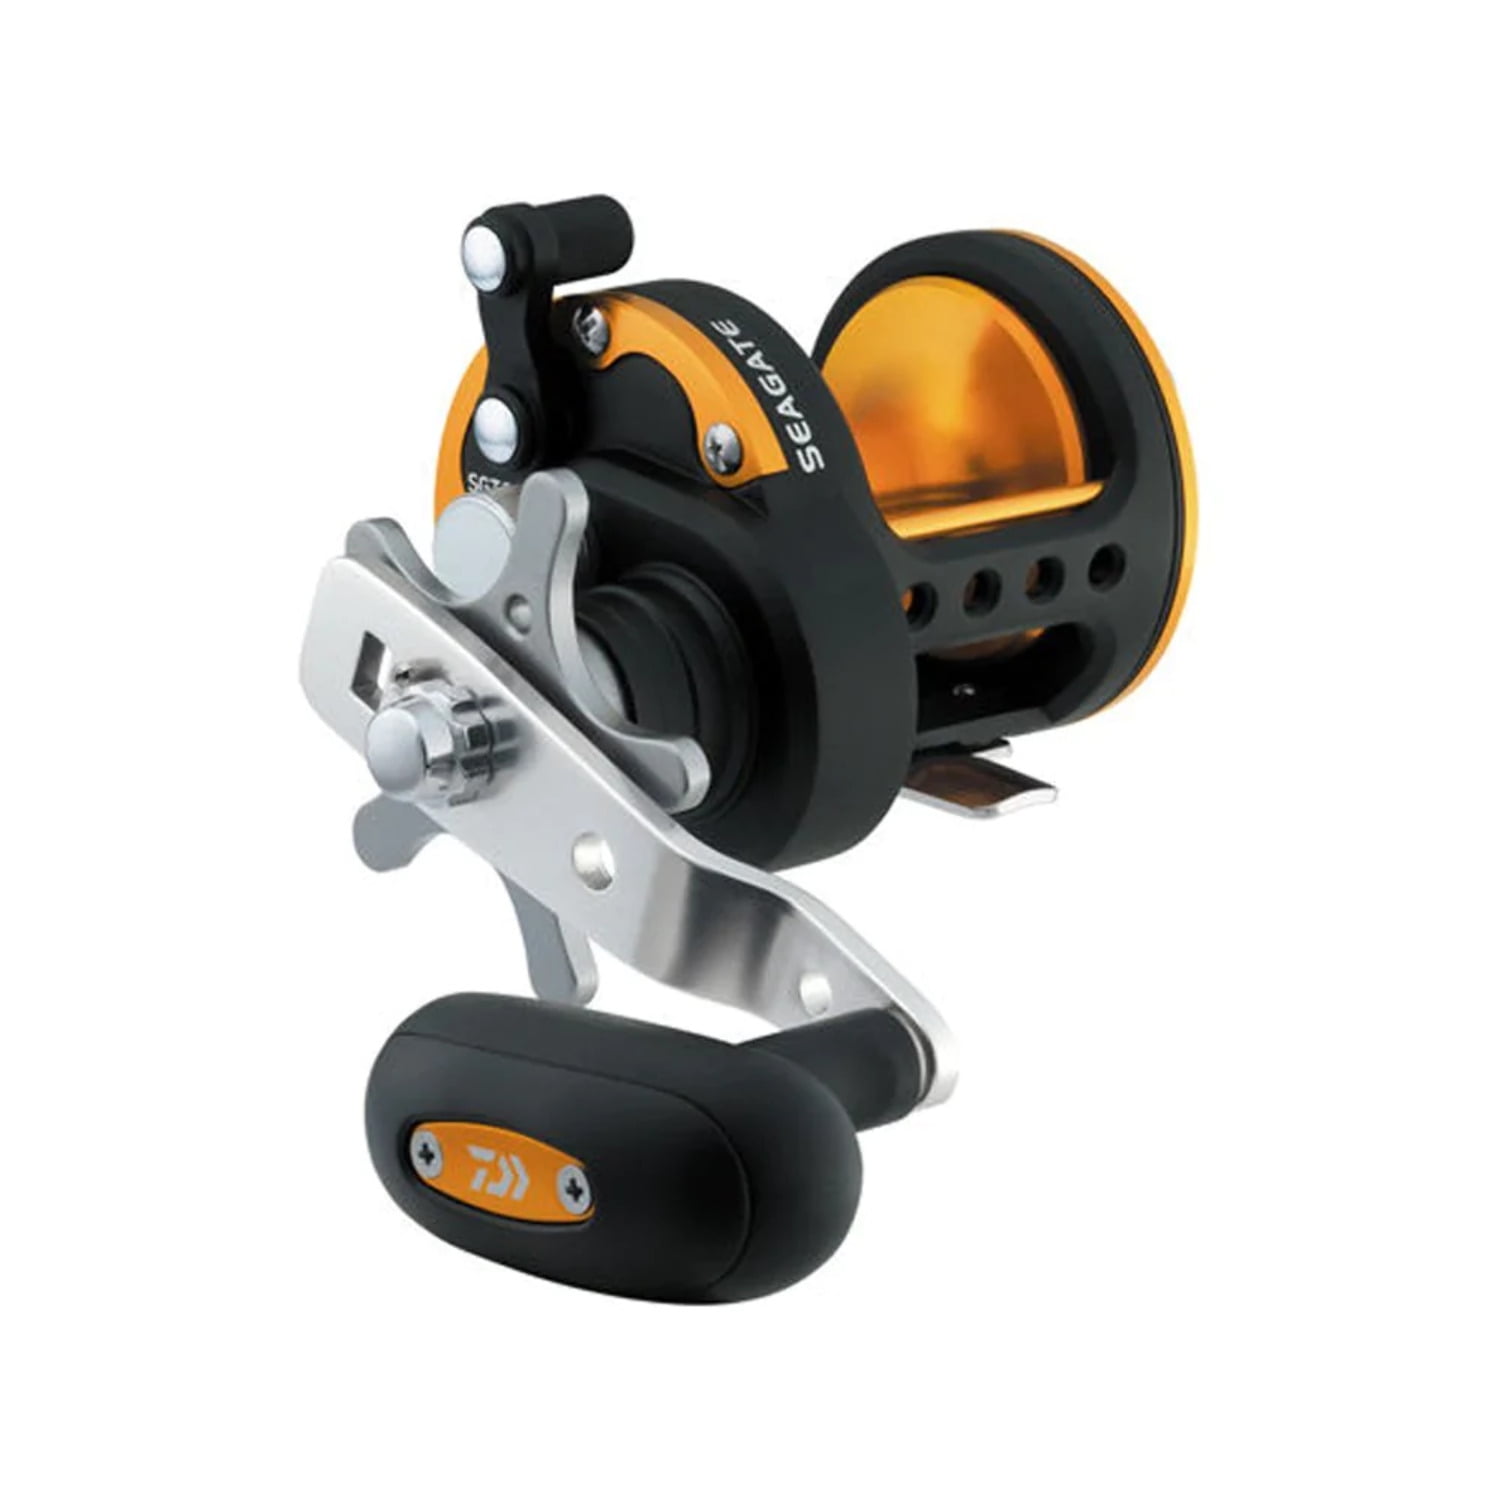 Daiwa Seagate Star Drag Conventional 6.1:1 Right Hand Saltwater Fishing Reel  - SGT20H 